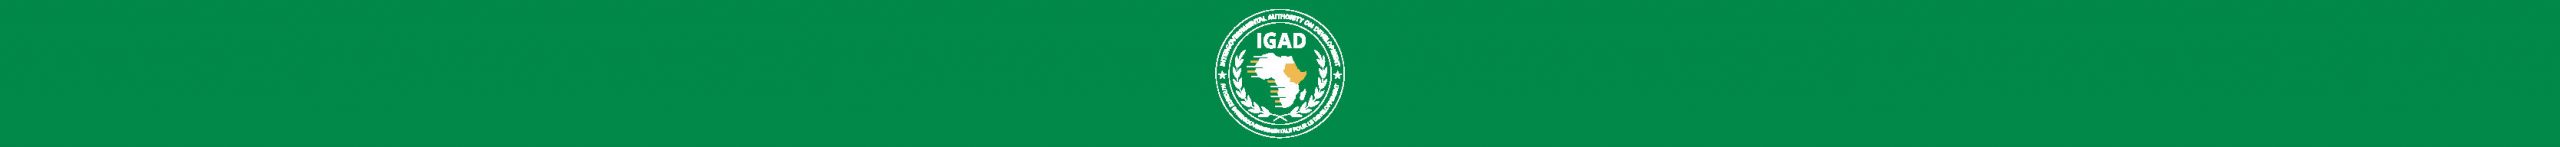 IGAD Convenes a Joint Steering Committee for its Water Related Programs in Nairobi